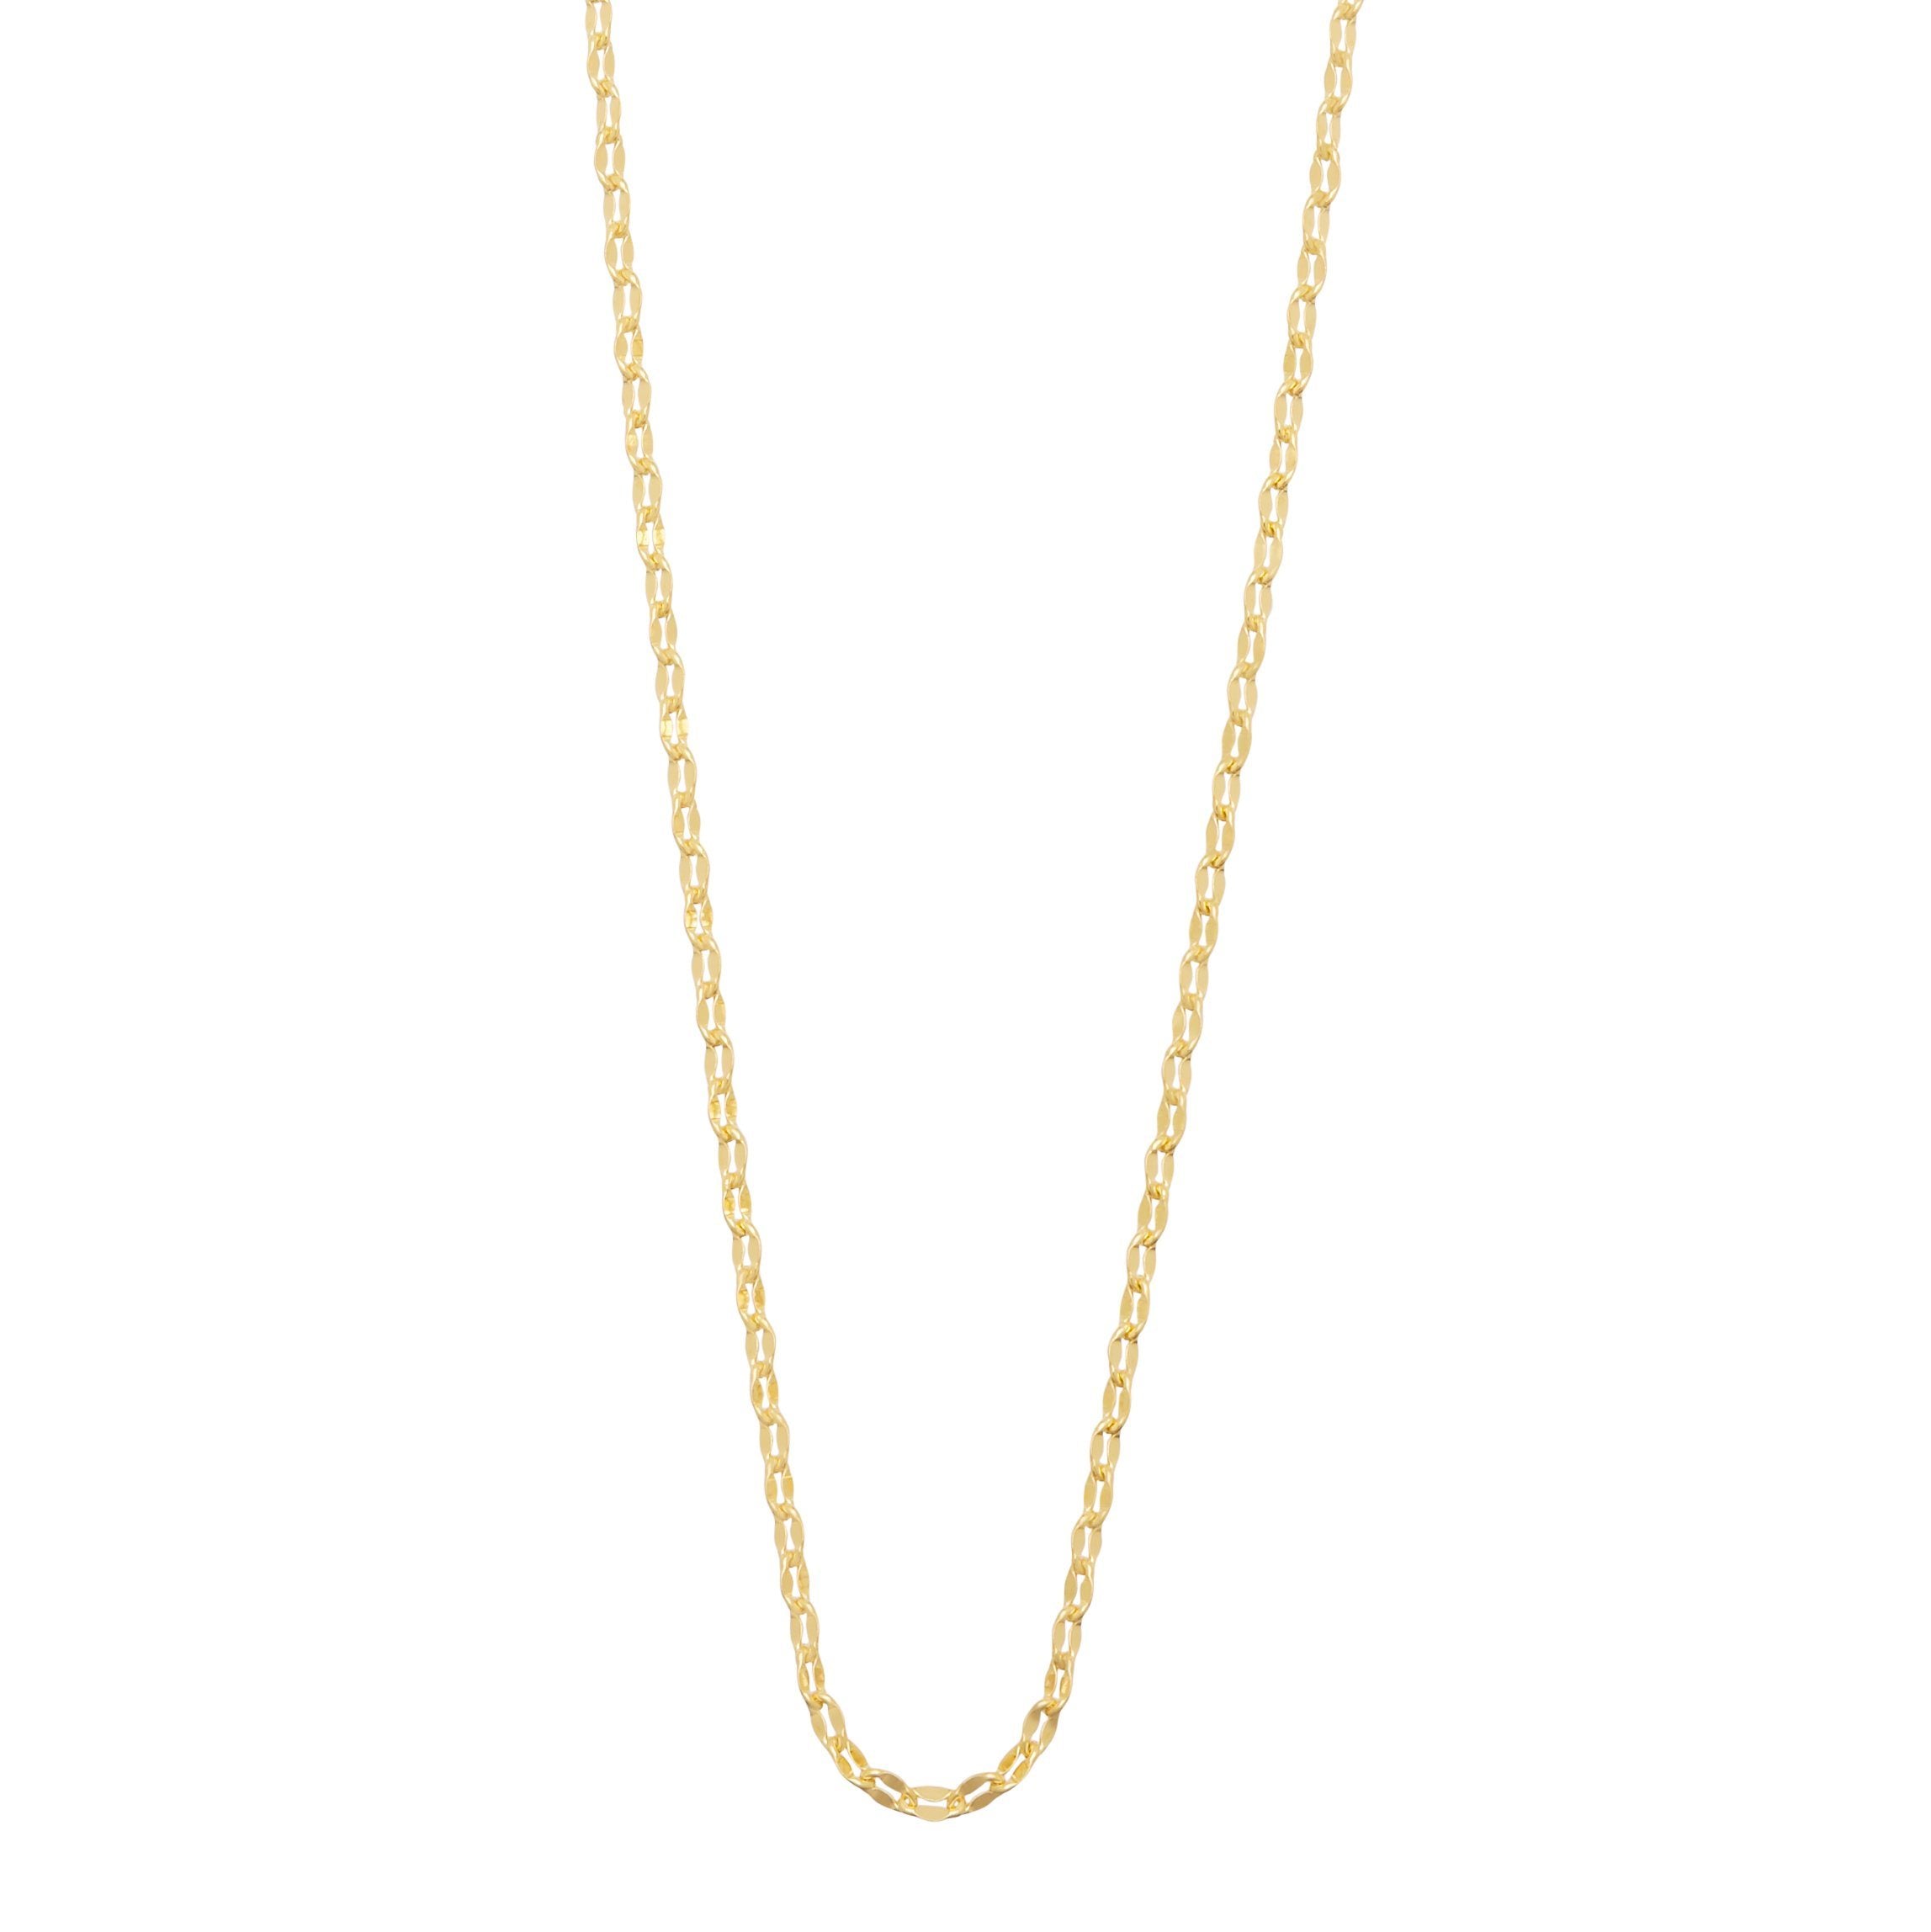 Cable Necklace 45cm in 9ct Yellow Gold Silver Infused Necklaces Bevilles 